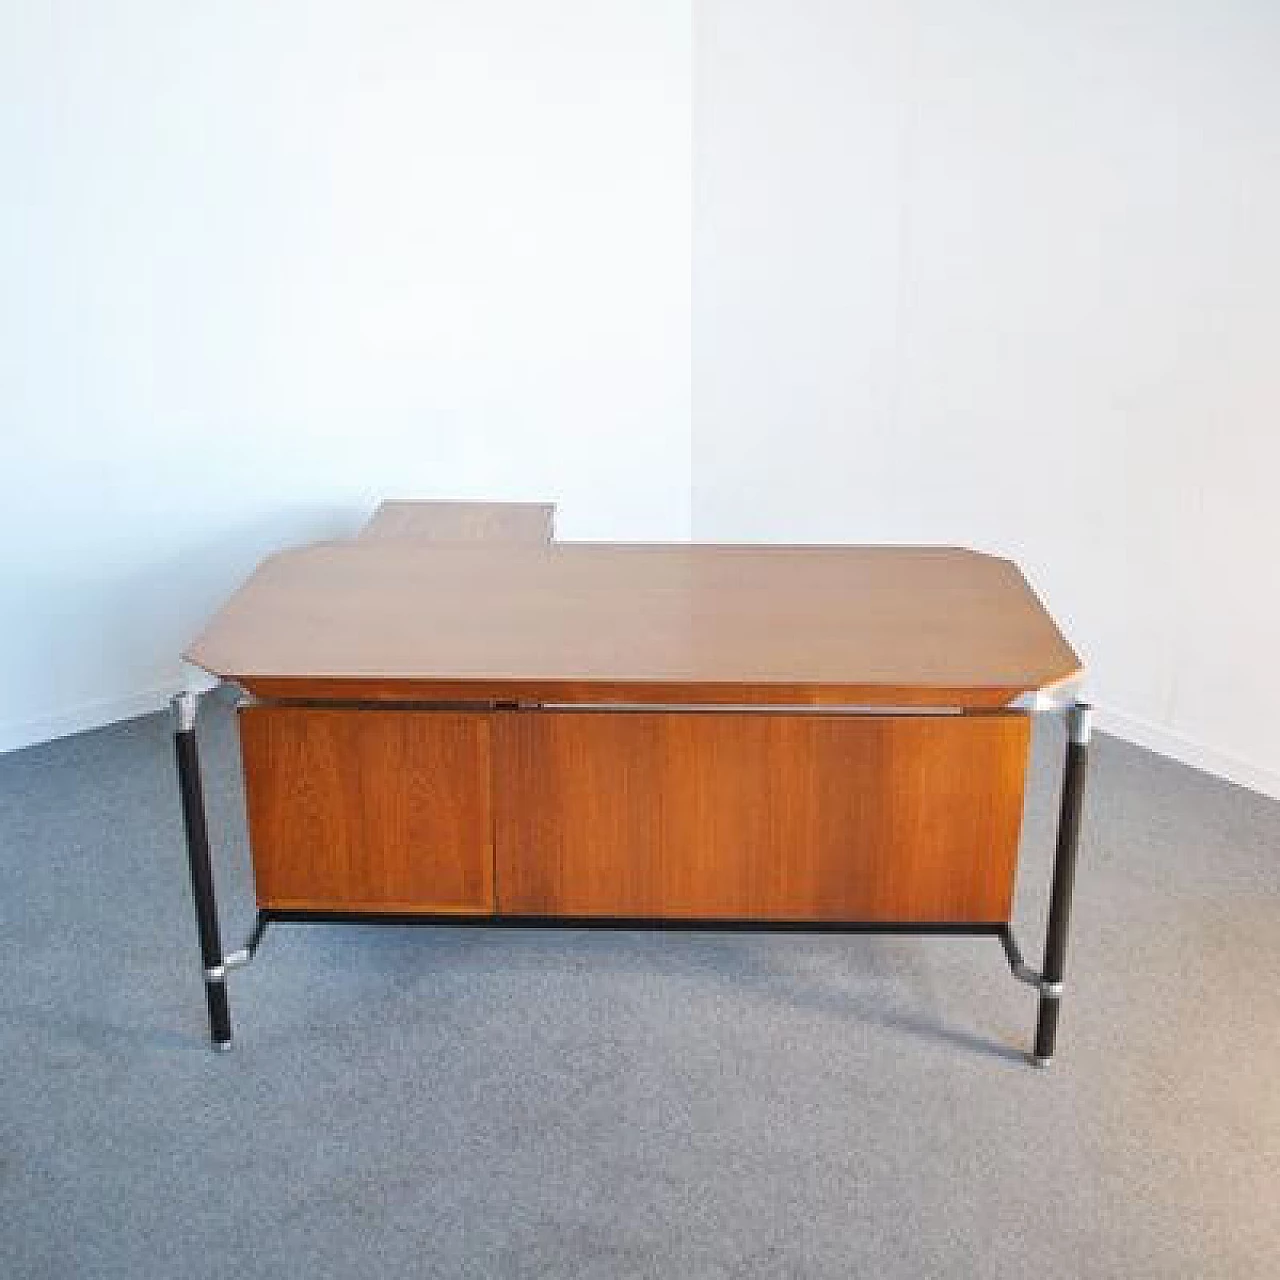 Executive desk by Ico Parisi for MIM Rome, 1950s 1452498